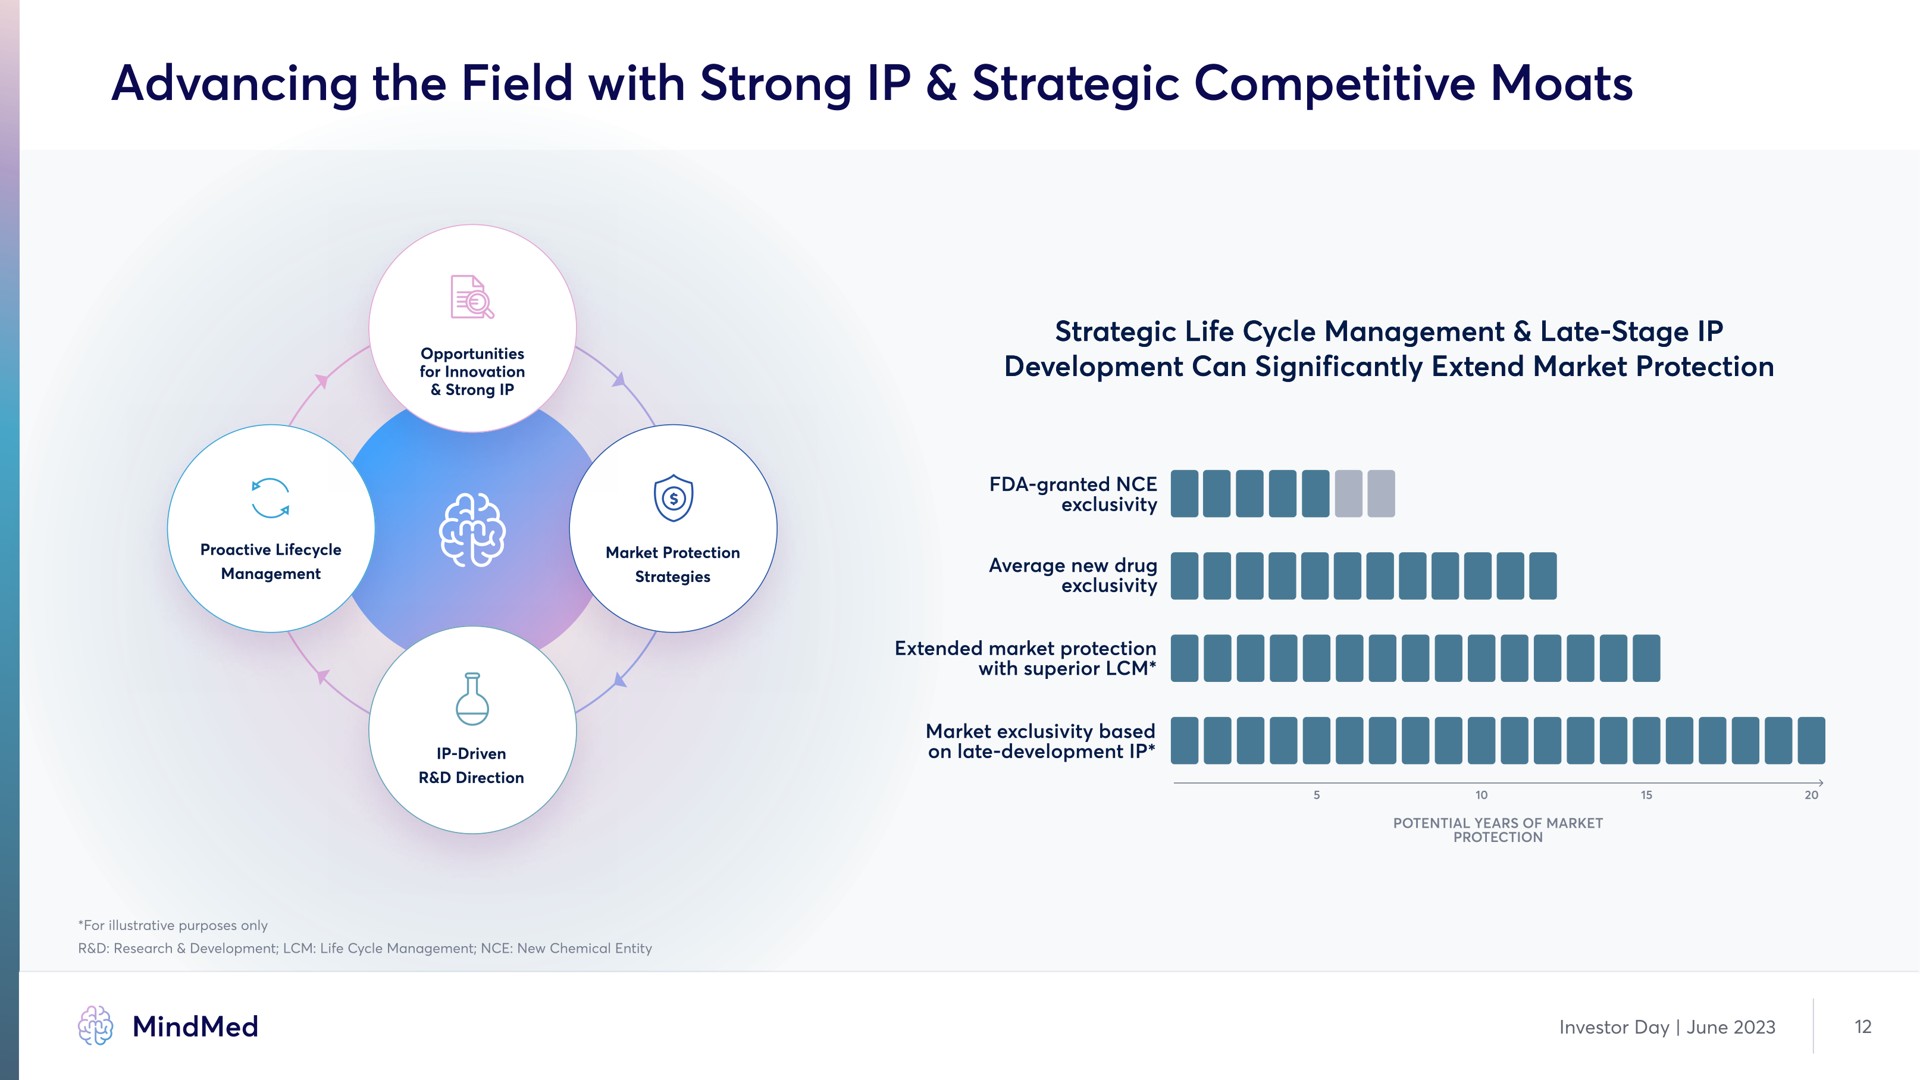 advancing the field with strong strategic competitive moats | MindMed